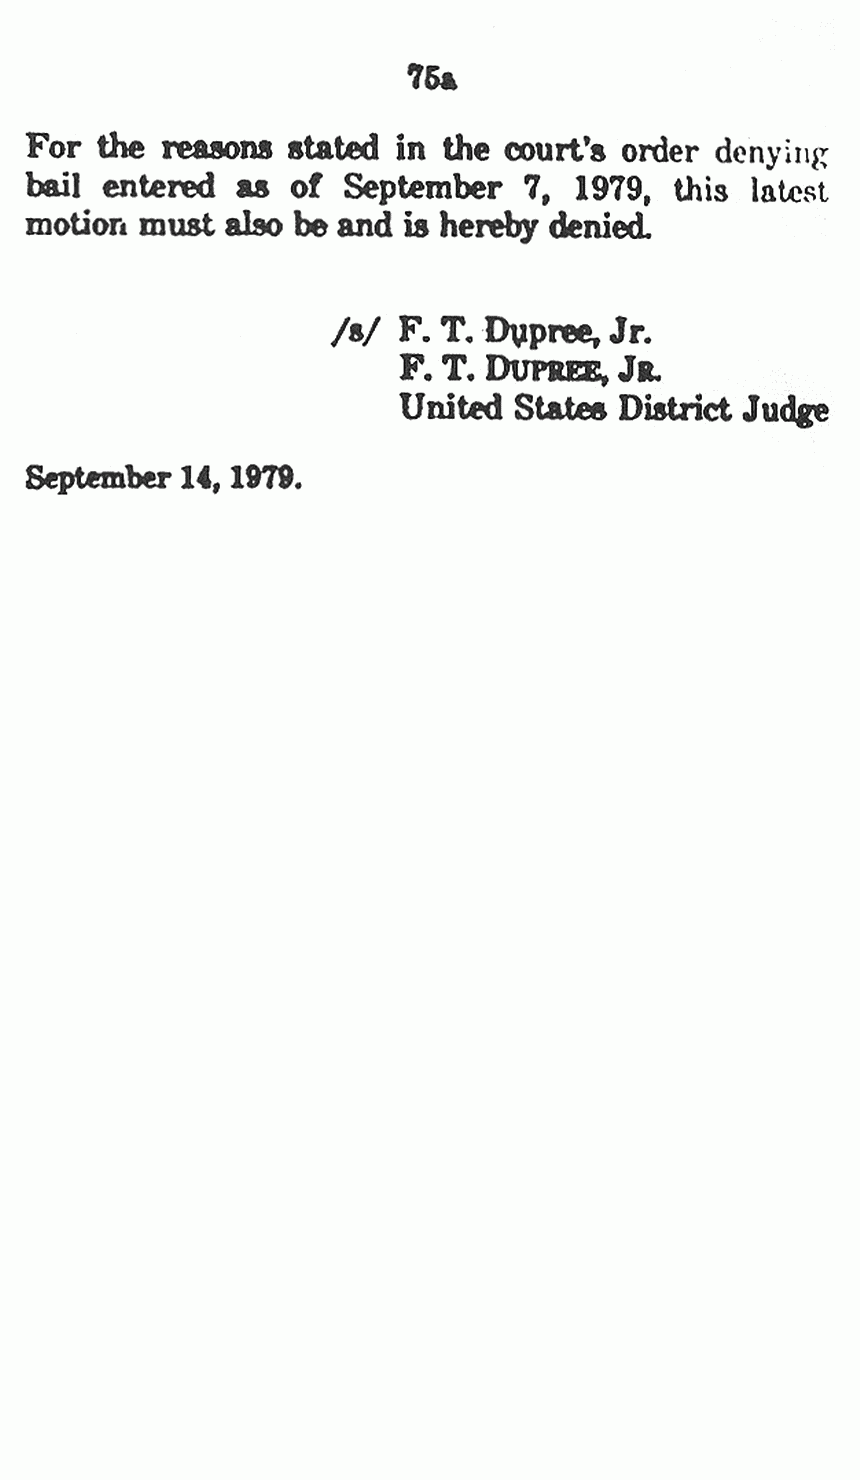 September 14, 1979: United States District Court, Eastern District of North Carolina; Order Denying Motion of Jeffrey MacDonald to Vacate Conviction and Dismiss Indictment, p. 2 of 2